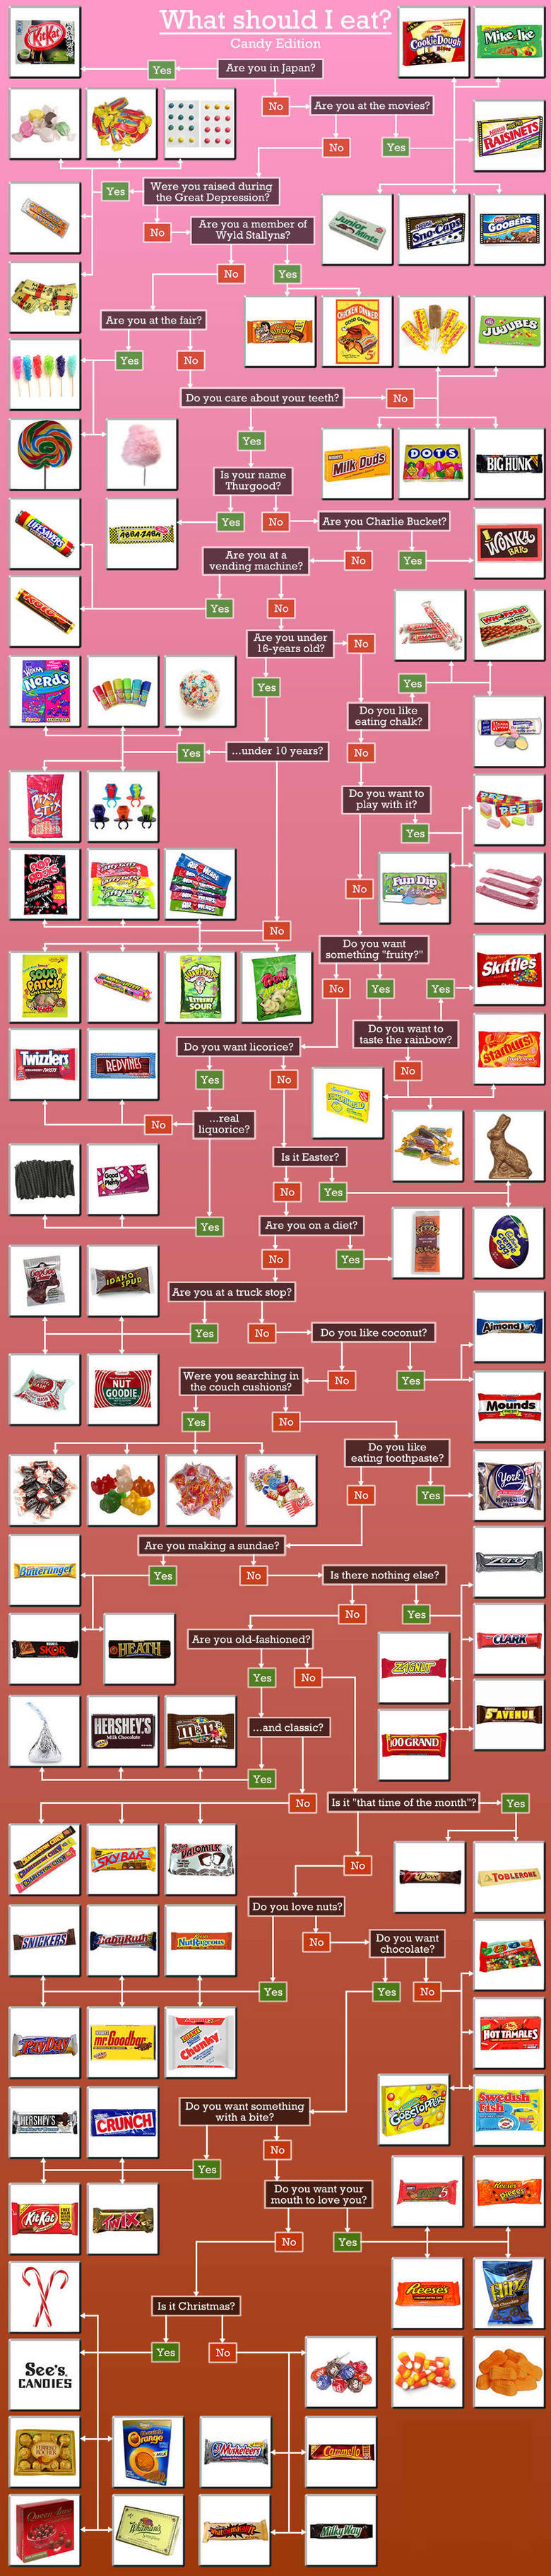 What Should i Eat ( Candy Edition ). Probly a Repost but yeah. What should I eat? Candy Edition Are you in Japan? Were you raised during the Great Depression? A